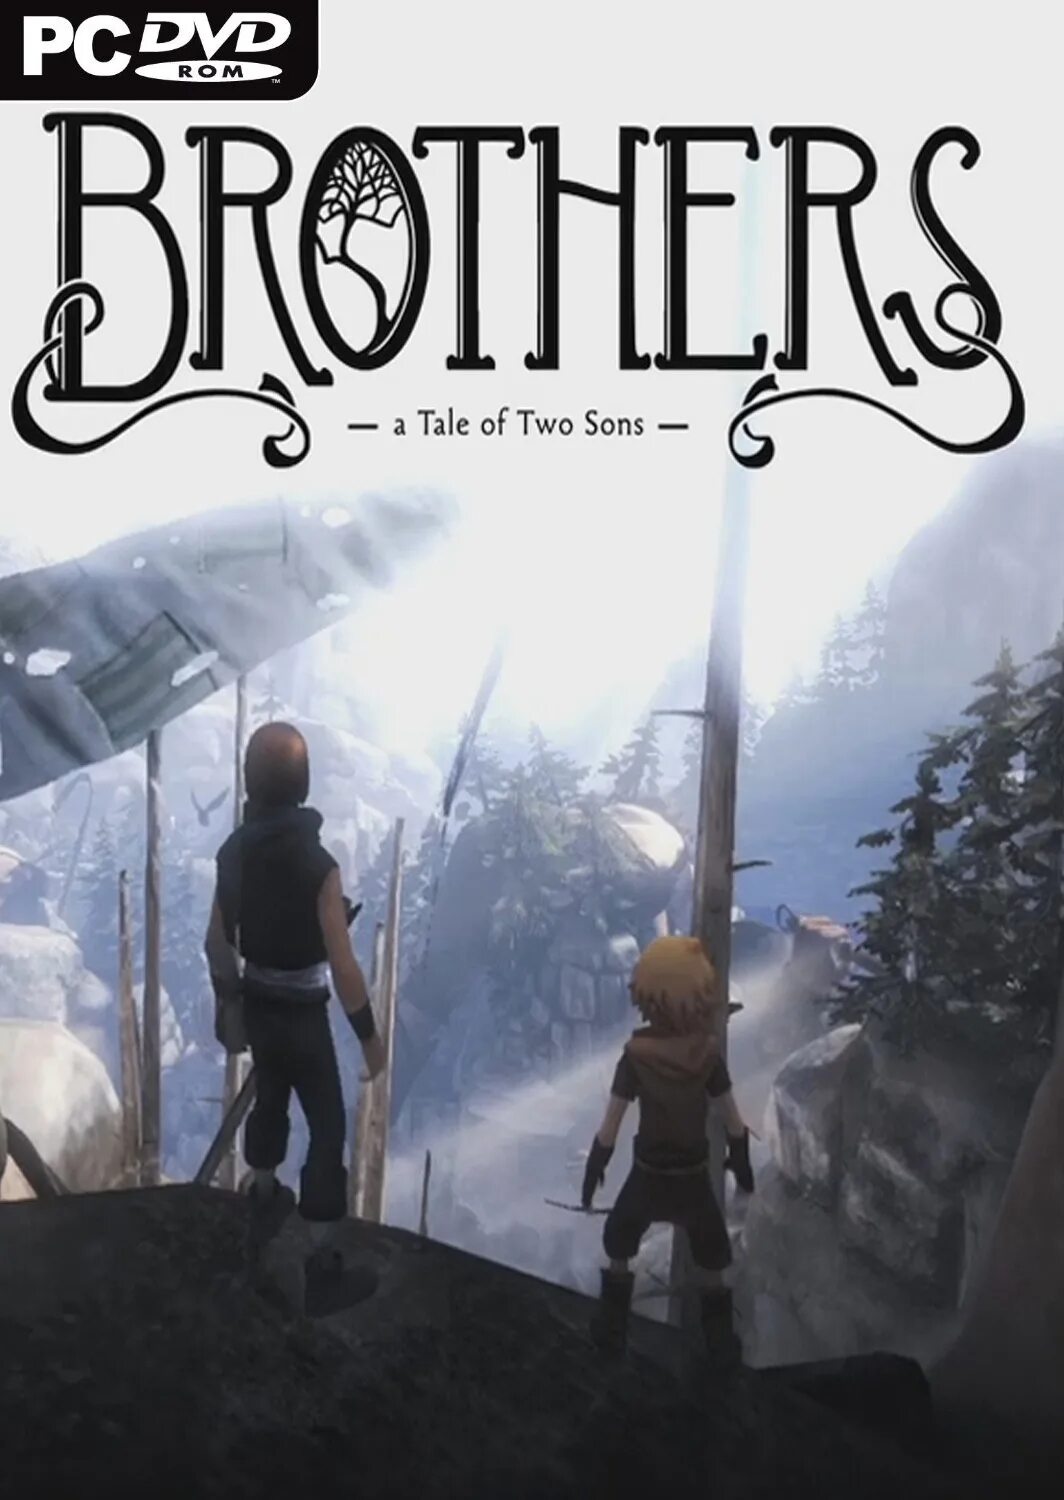 Brother a tale of two xbox. Игра brothers a Tale of two sons. Brothers a Tale of two sons ps4. Brothers: a Tale of two sons (2013). Brothers: a Tale of two sons Xbox 360.